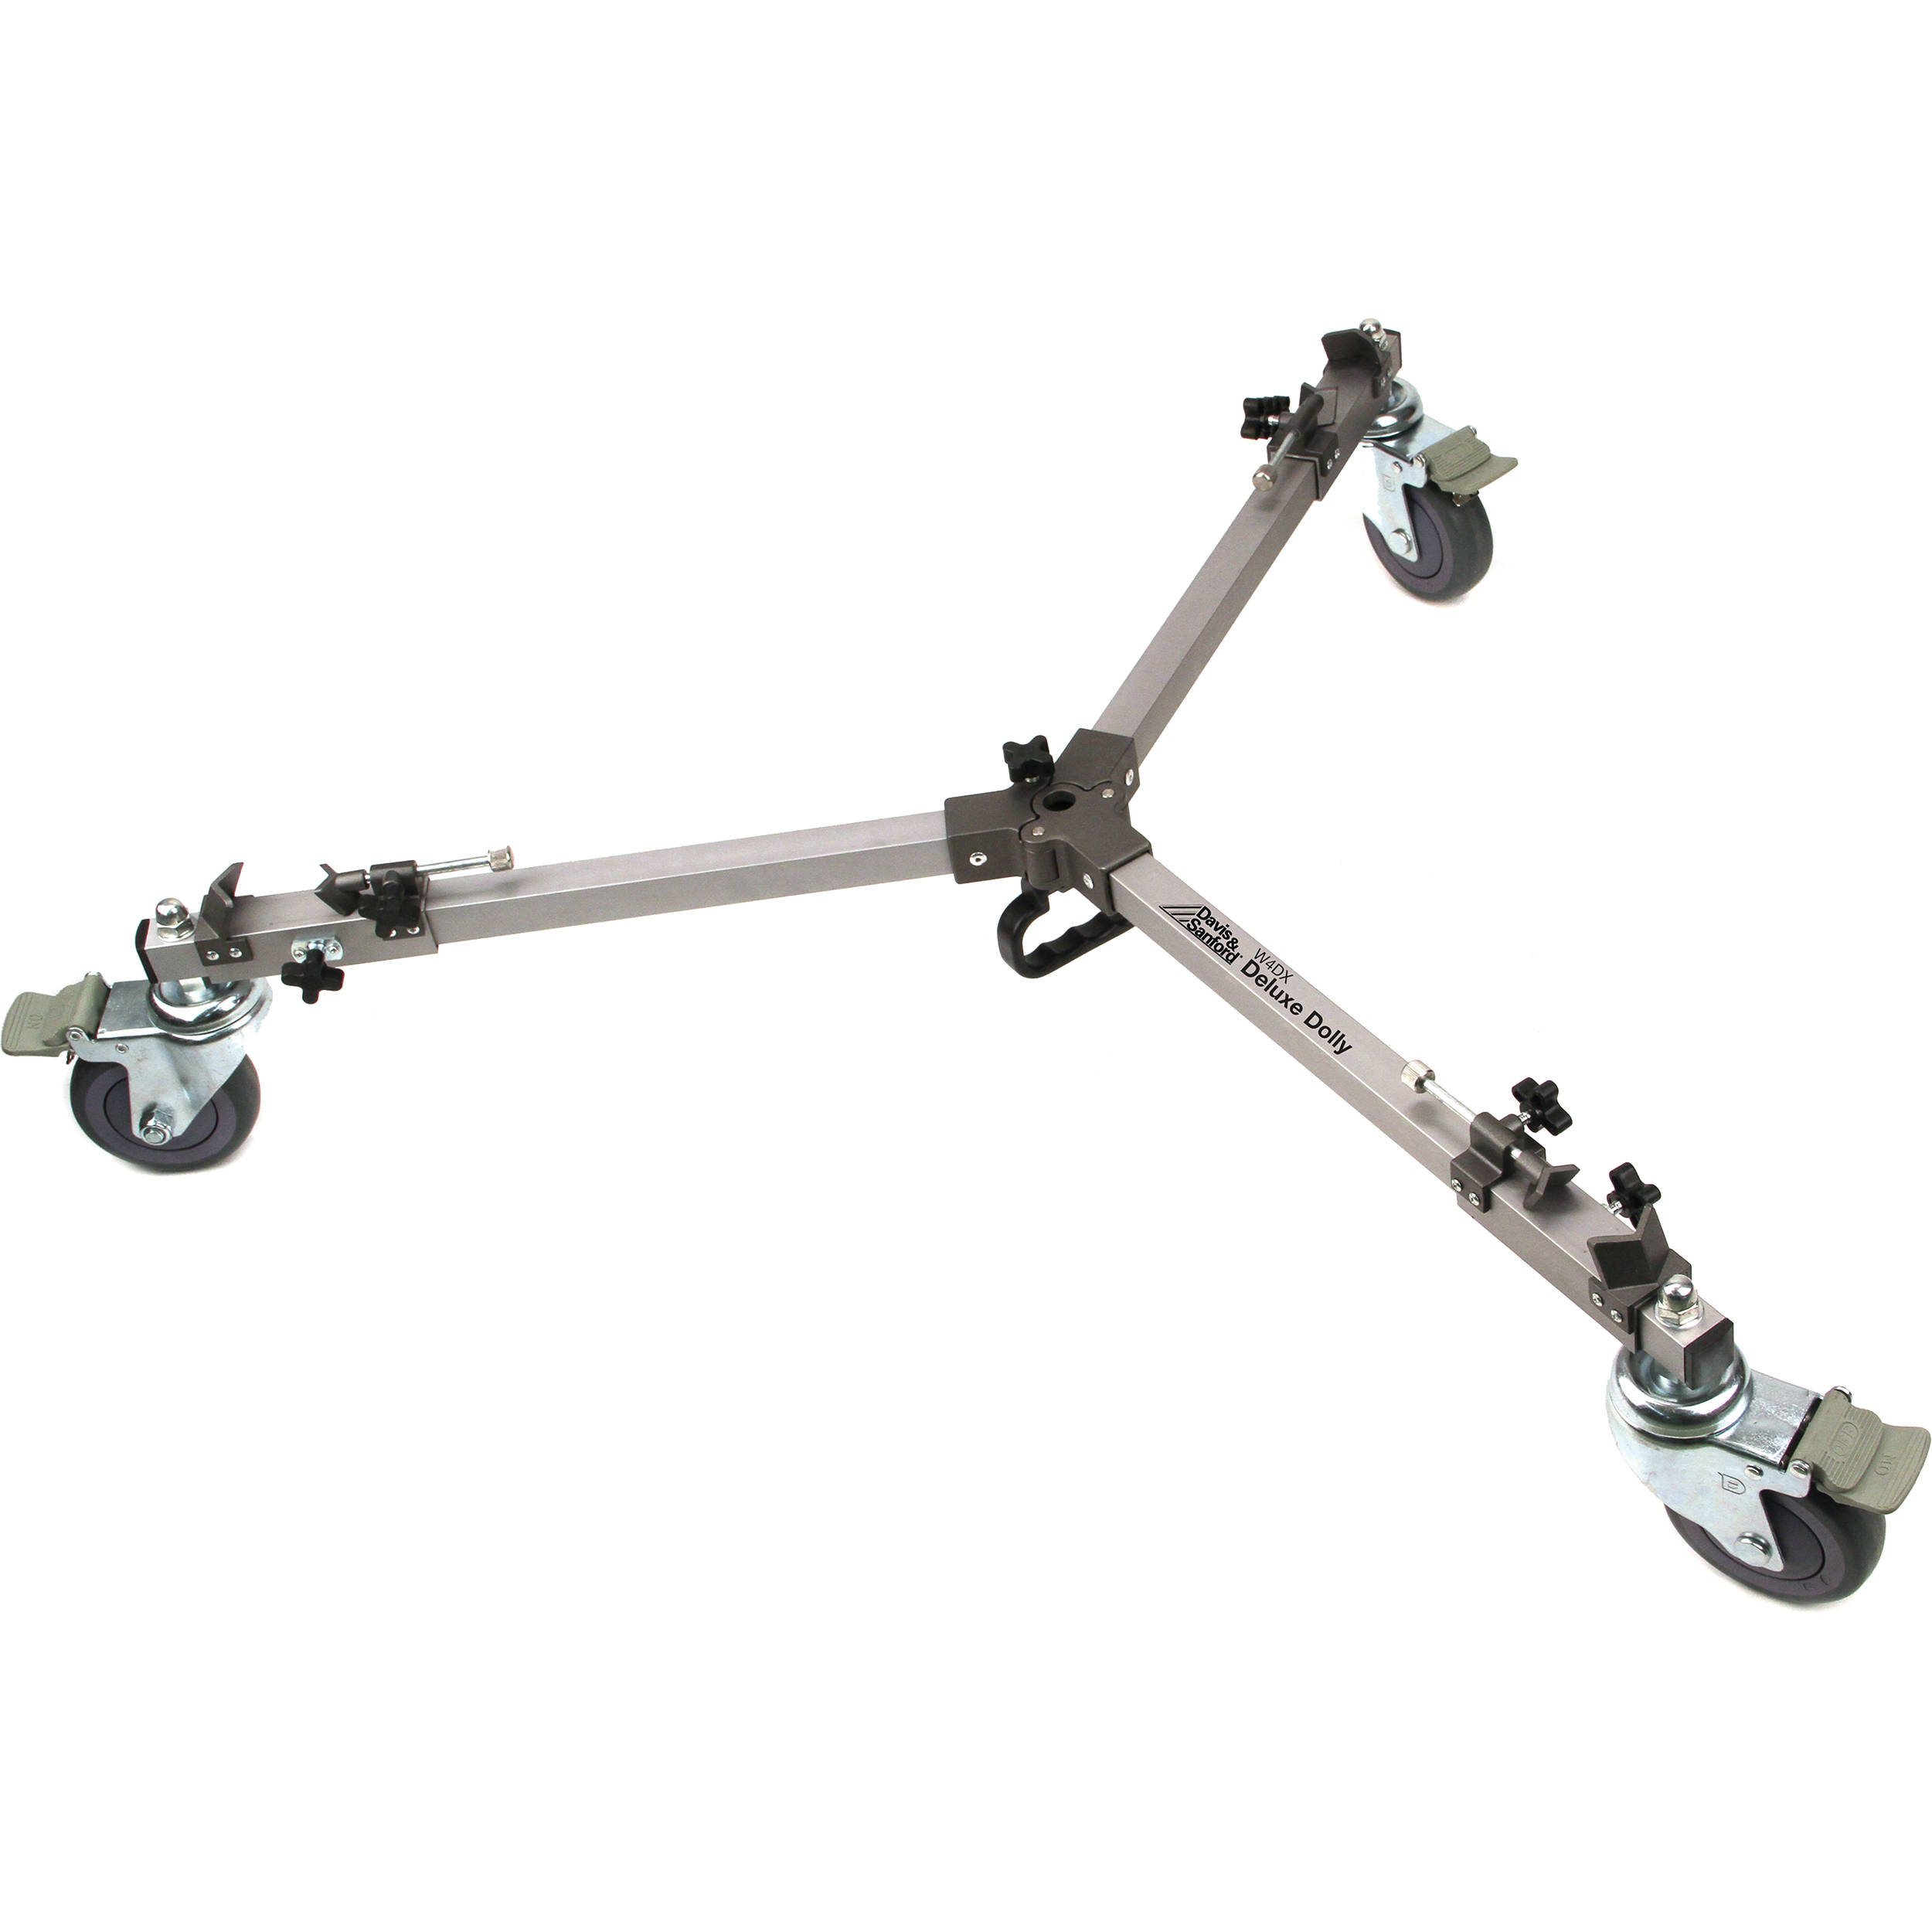 Davis and Sanford W4DX Deluxe Dolly